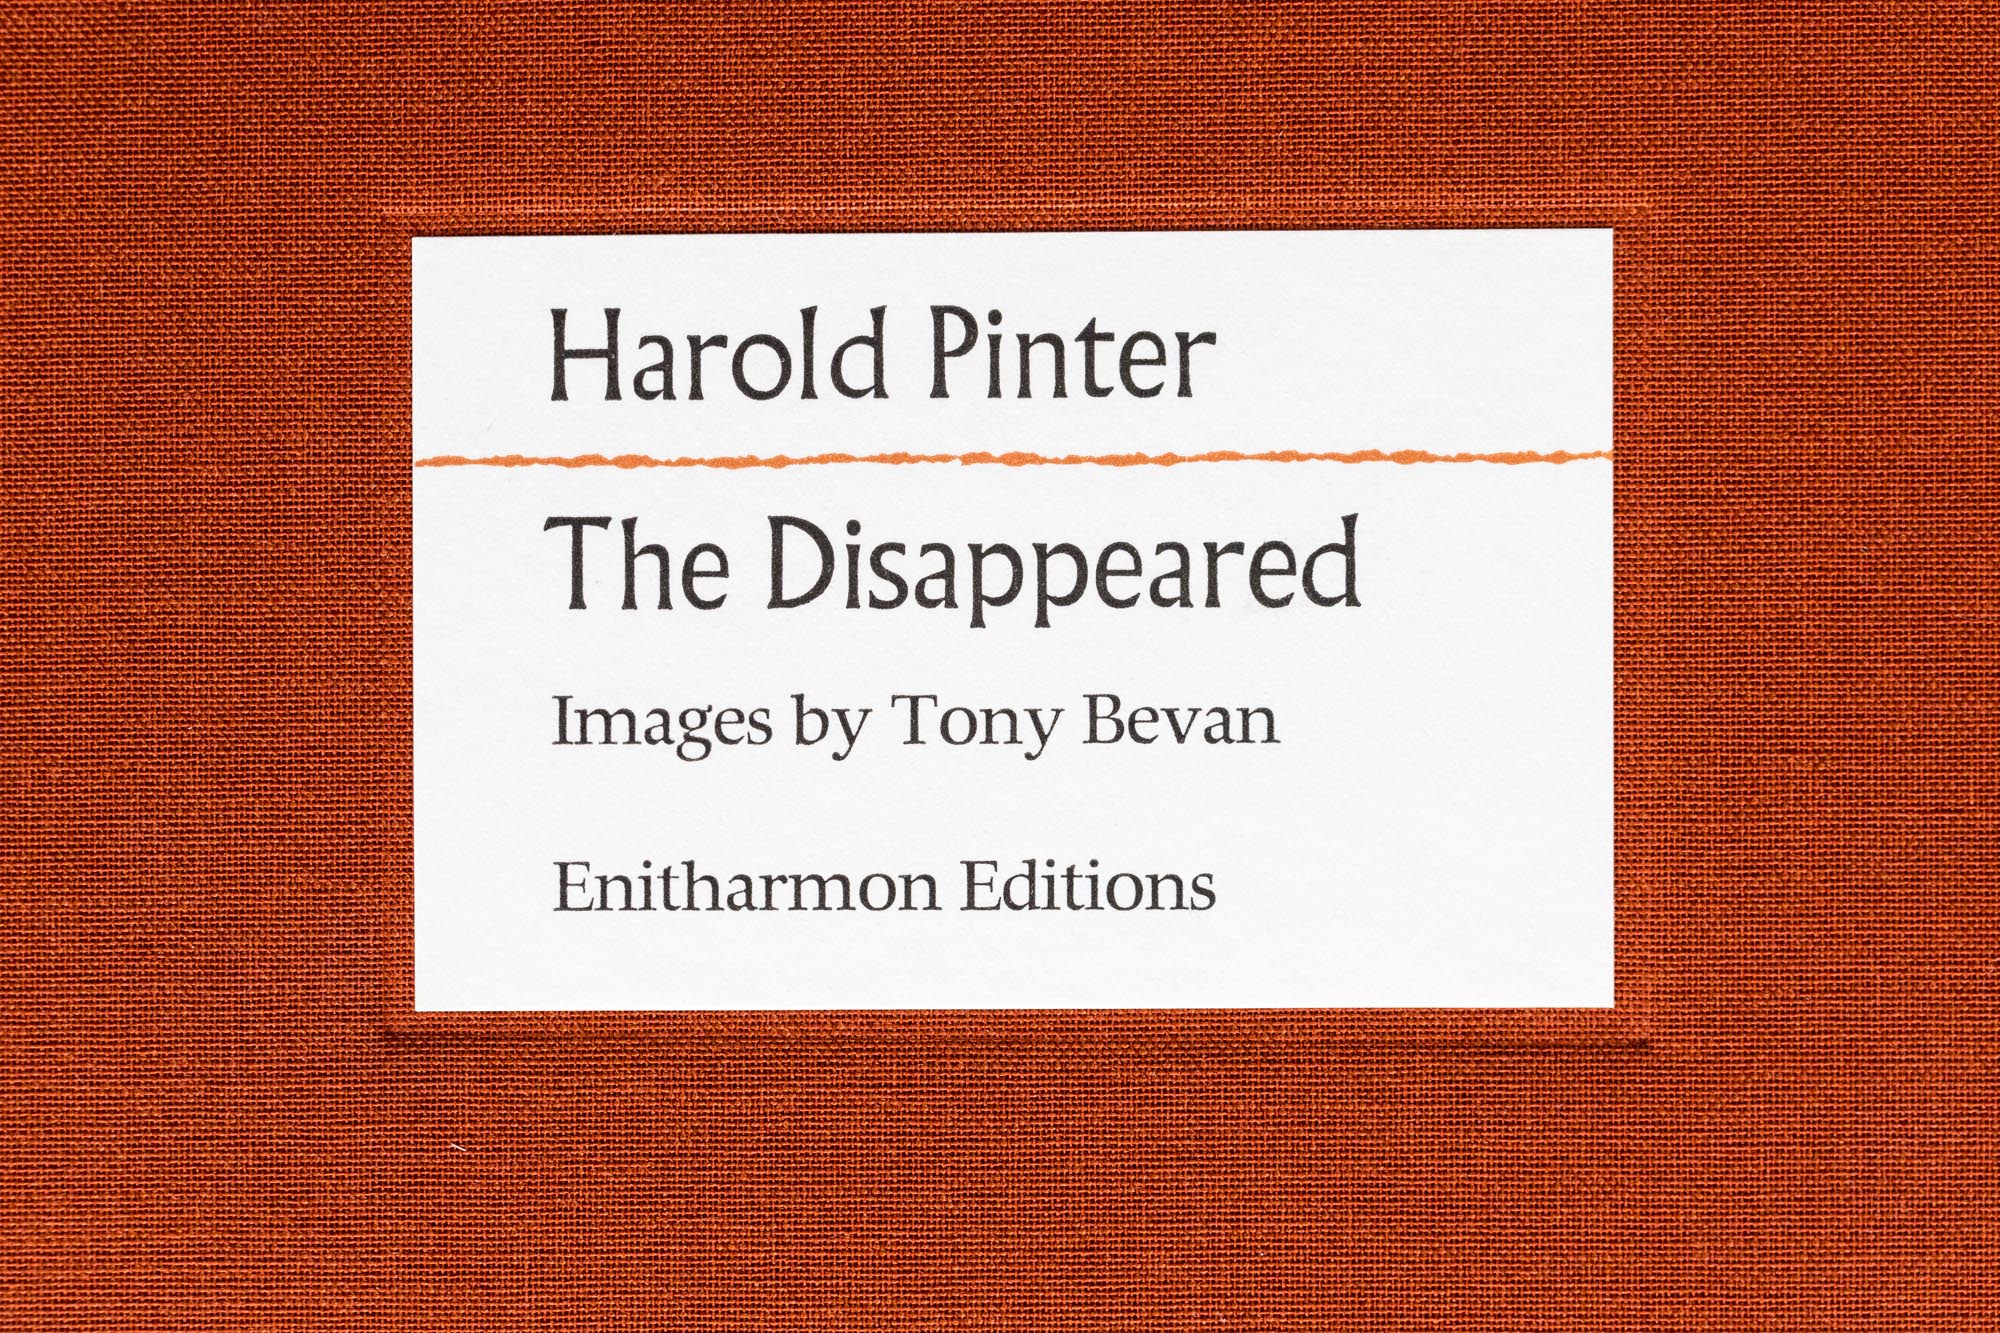 disappeared_pinter_bevan10